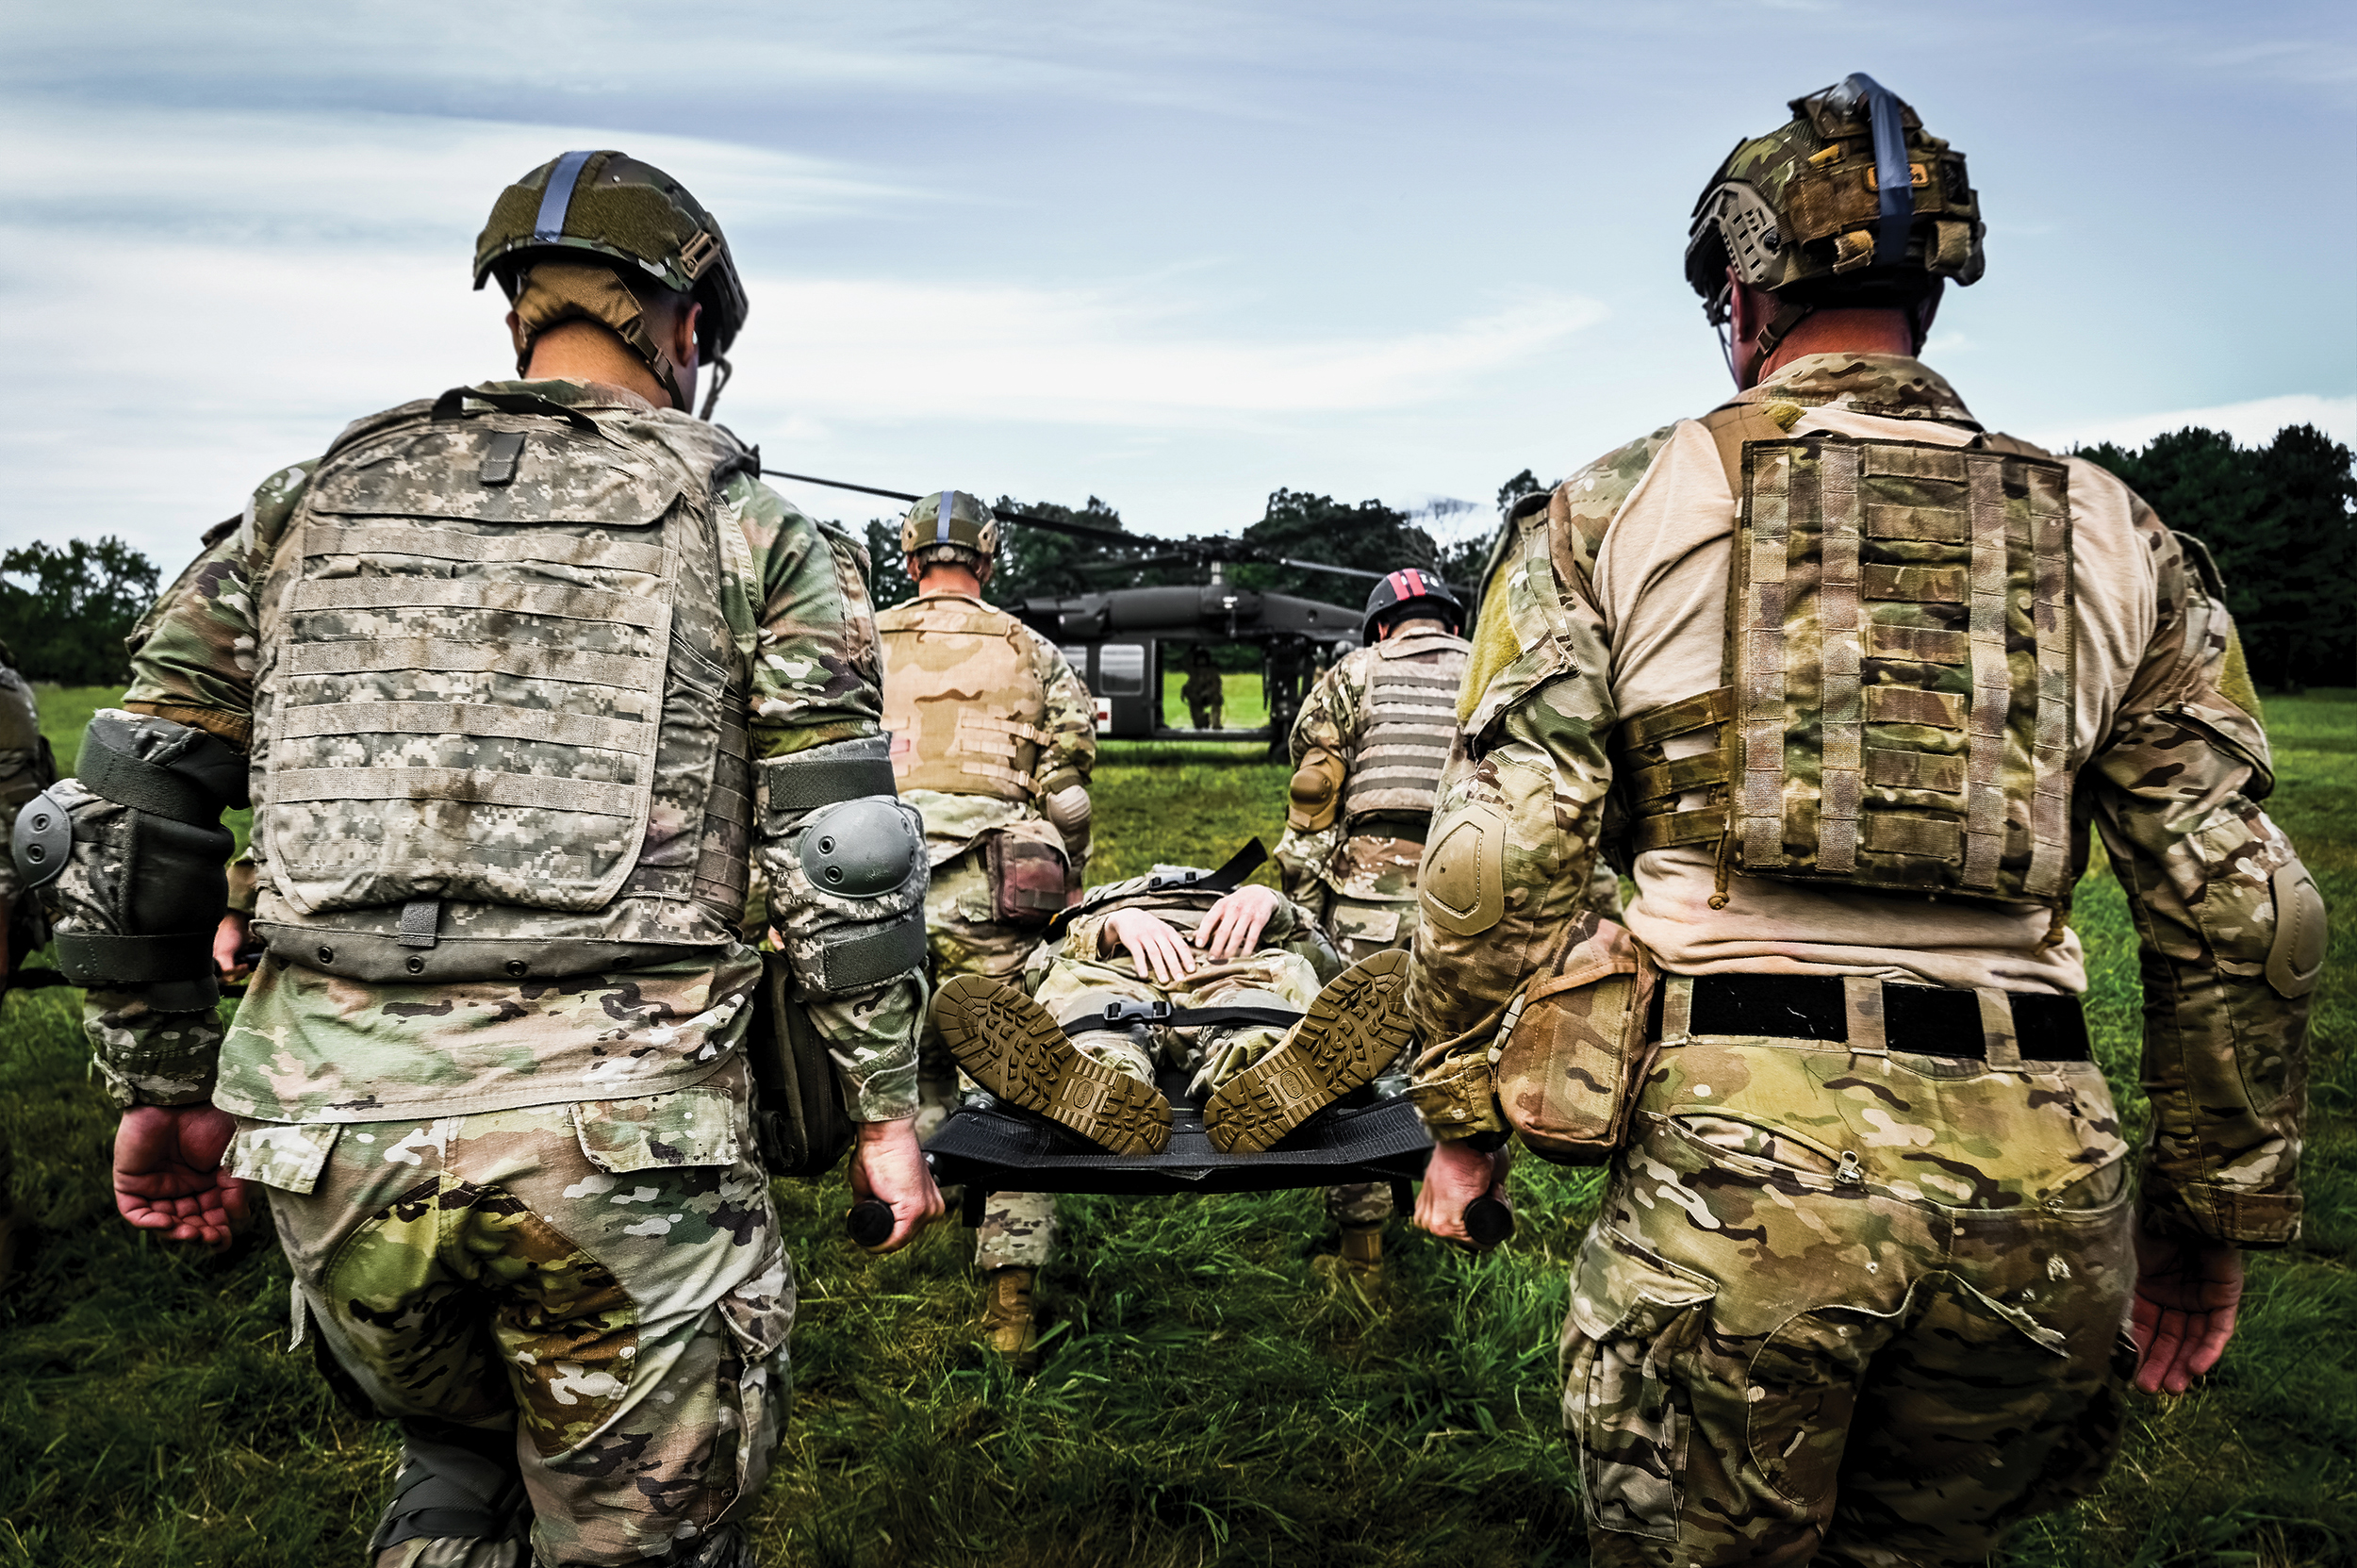 Soldiers assigned to Army Reserve participate in Tactical Casualty Combat Care course at Joint Base McGuire-Dix-Lakehurst, New Jersey